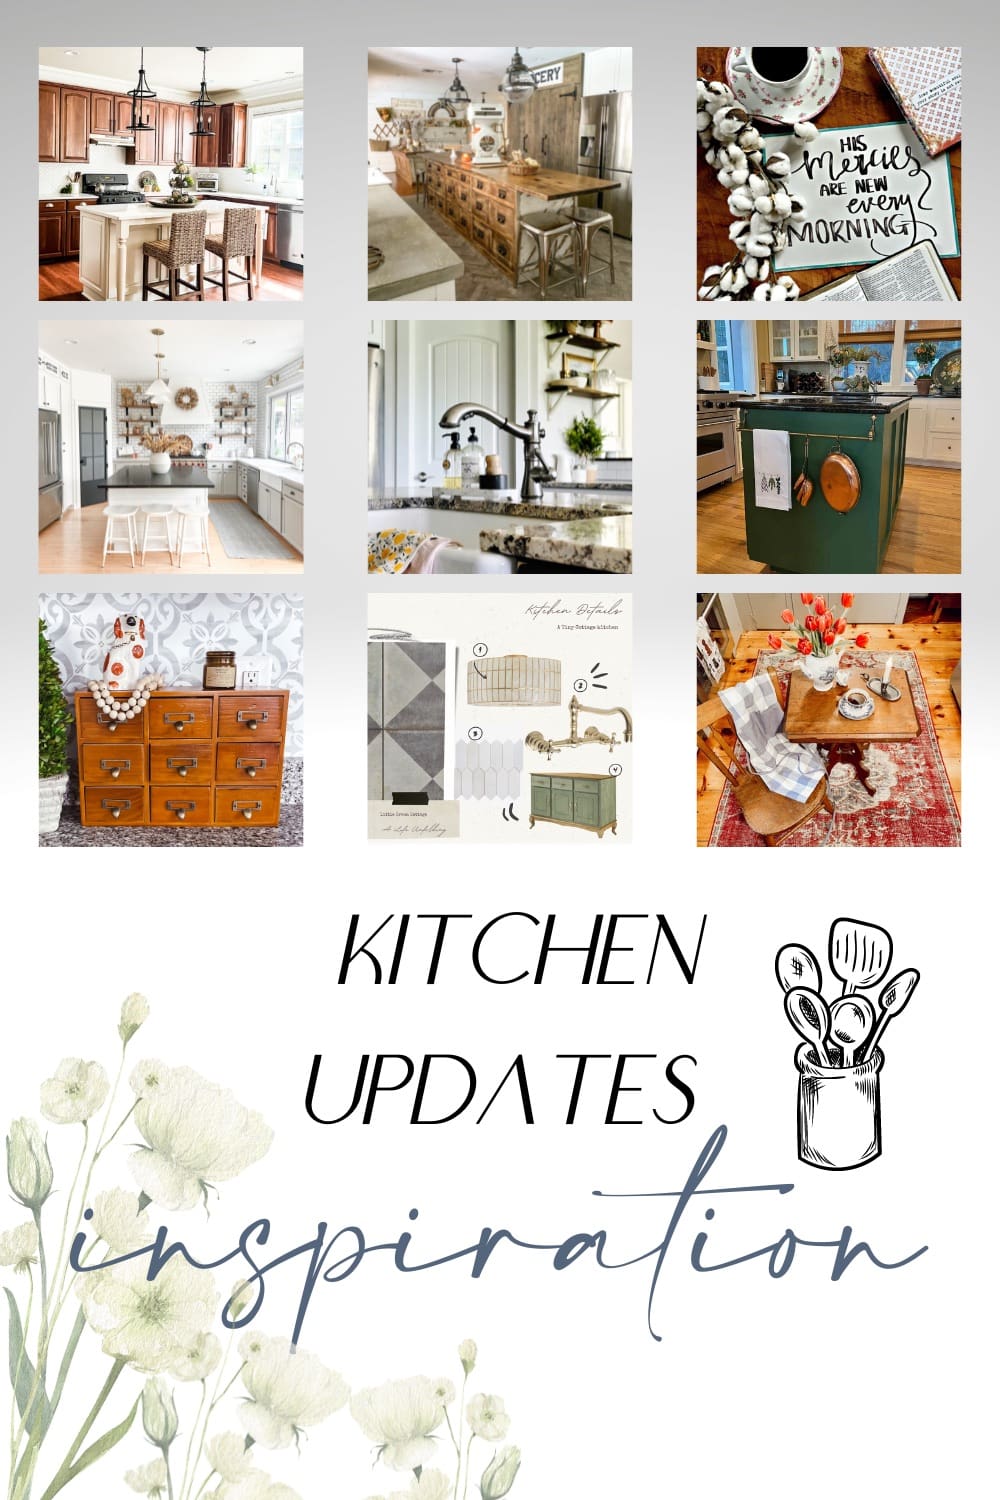 7 Custom Kitchen Island Ideas and Needs to Consider for Your Kitchen Renovation